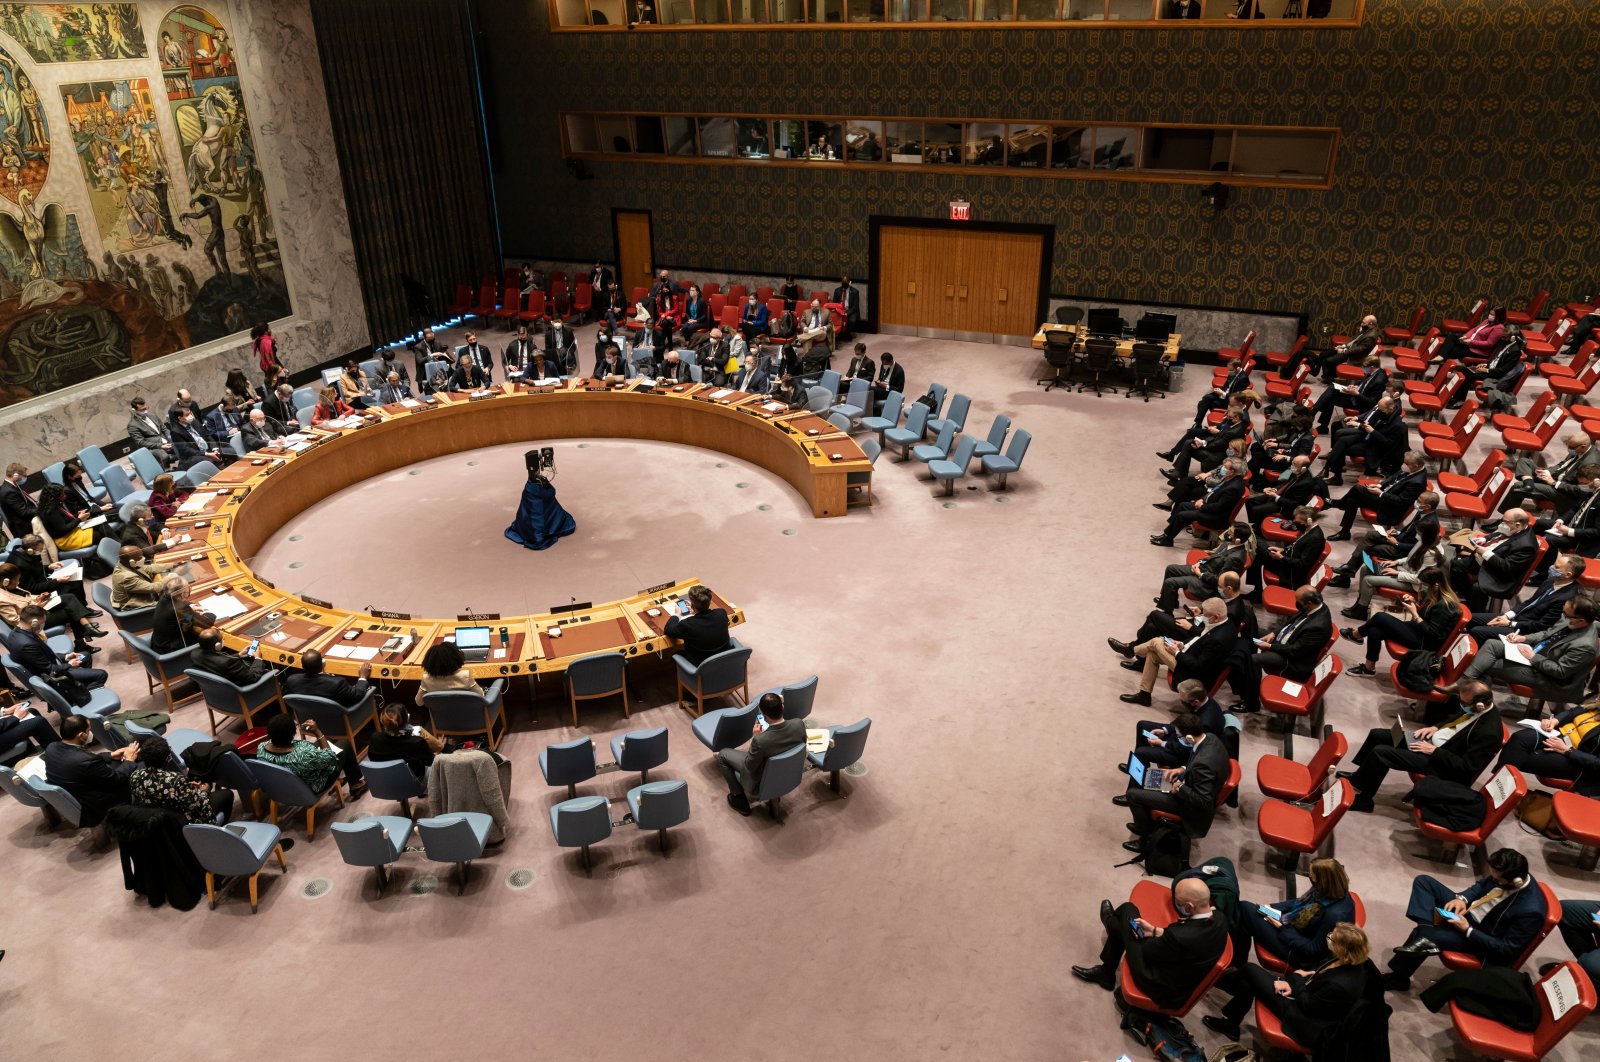 The U.N. Security Council meets to vote on a resolution regarding Russian aggression in Ukraine, at the U.N. headquarters in New York, U.S., Feb. 27, 2022. (Shutterstock Photo)